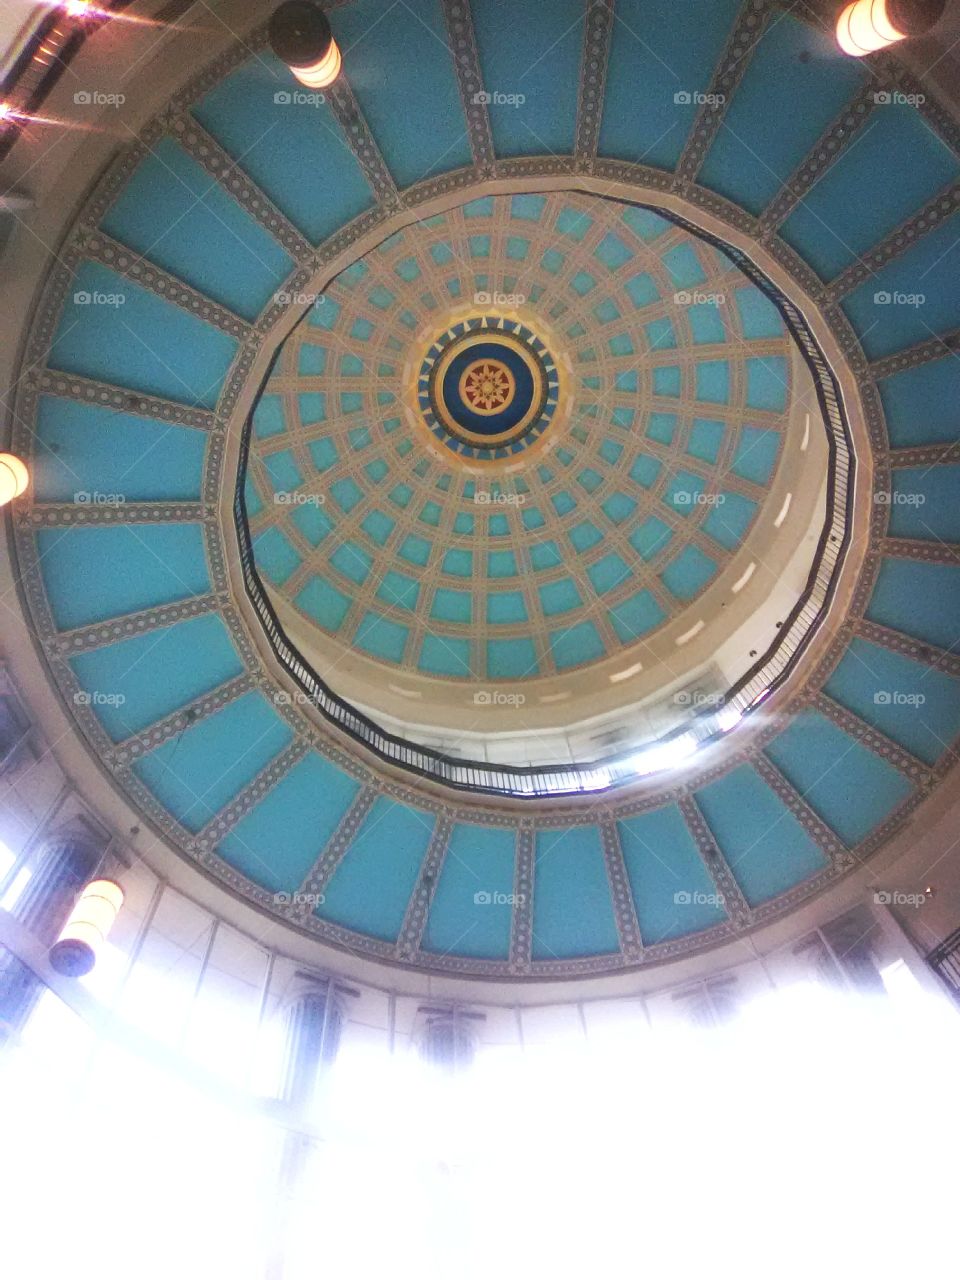 The dome inside the Matheson Courthouse.
SLC, Utah